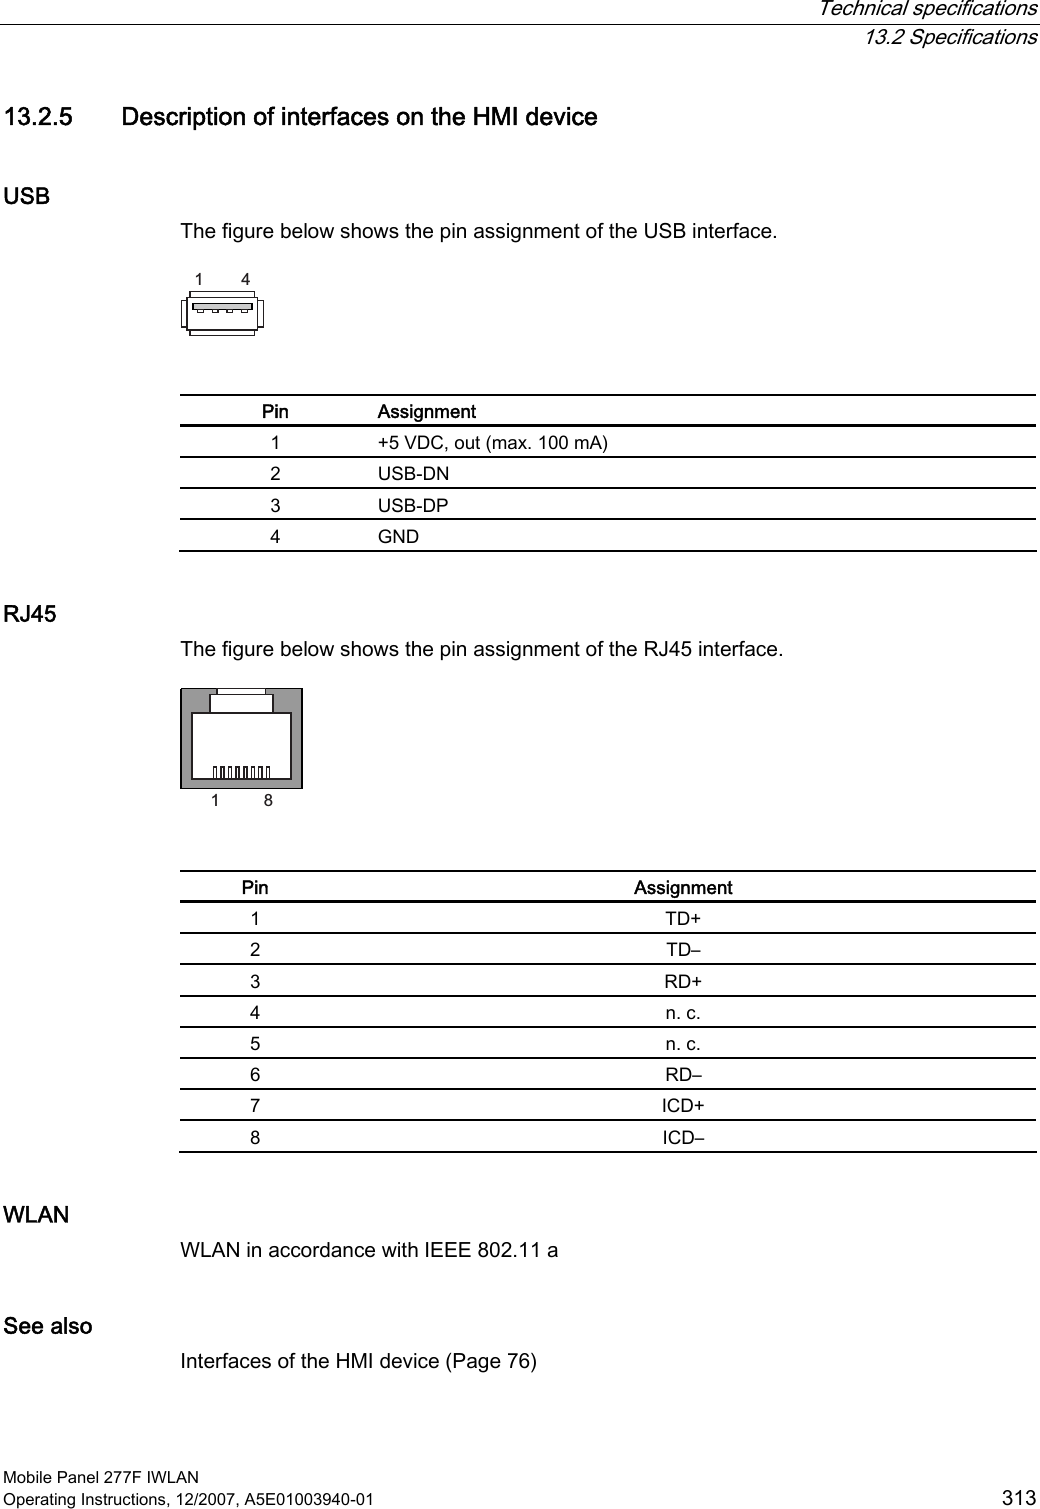  Technical specifications  13.2 Specifications Mobile Panel 277F IWLAN Operating Instructions, 12/2007, A5E01003940-01  313 13.2.5 Description of interfaces on the HMI device USB The figure below shows the pin assignment of the USB interface.    Pin  Assignment 1  +5 VDC, out (max. 100 mA) 2  USB-DN 3  USB-DP 4  GND RJ45 The figure below shows the pin assignment of the RJ45 interface.    Pin  Assignment 1  TD+ 2  TD– 3  RD+ 4  n. c. 5  n. c. 6  RD– 7  ICD+ 8  ICD– WLAN WLAN in accordance with IEEE 802.11 a See also Interfaces of the HMI device (Page 76) 